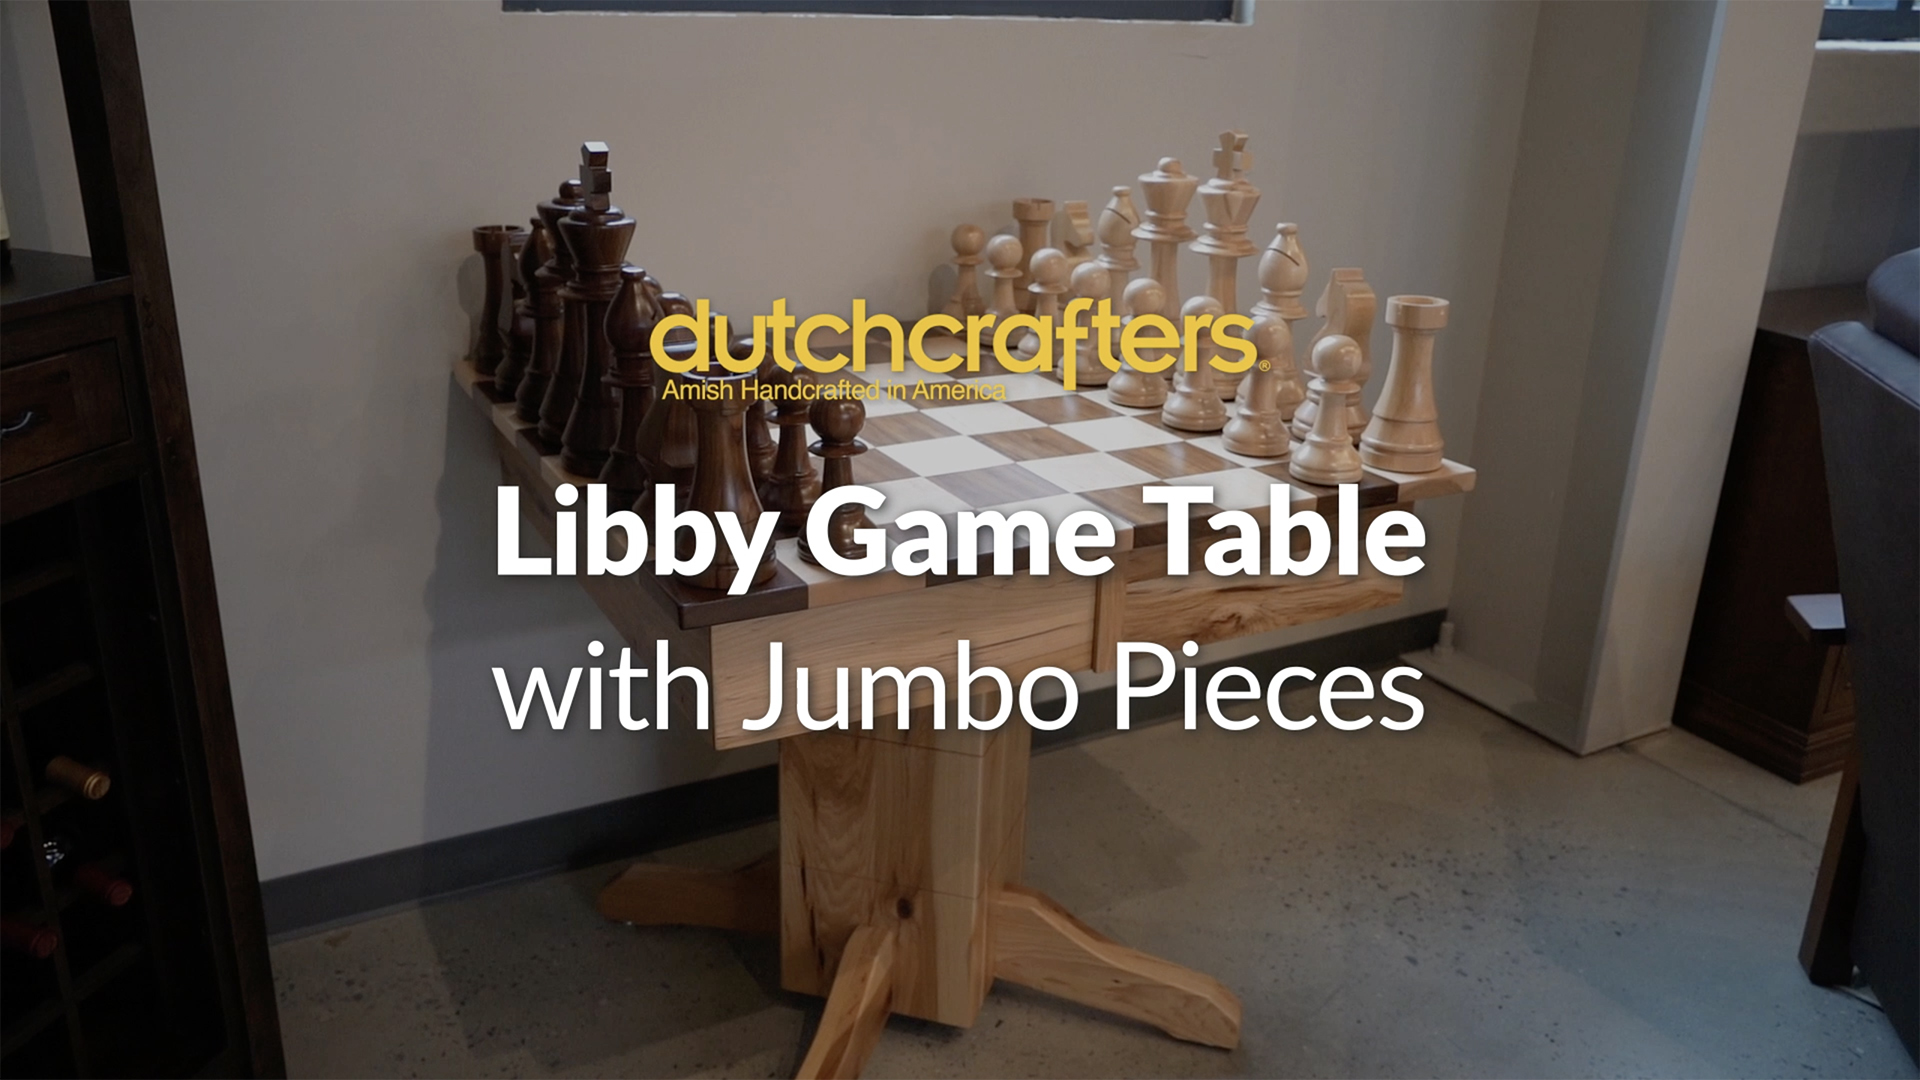 A solid wood game table is topped with the title, "DutchCrafters Libby Game Table with Jumbo Pieces"